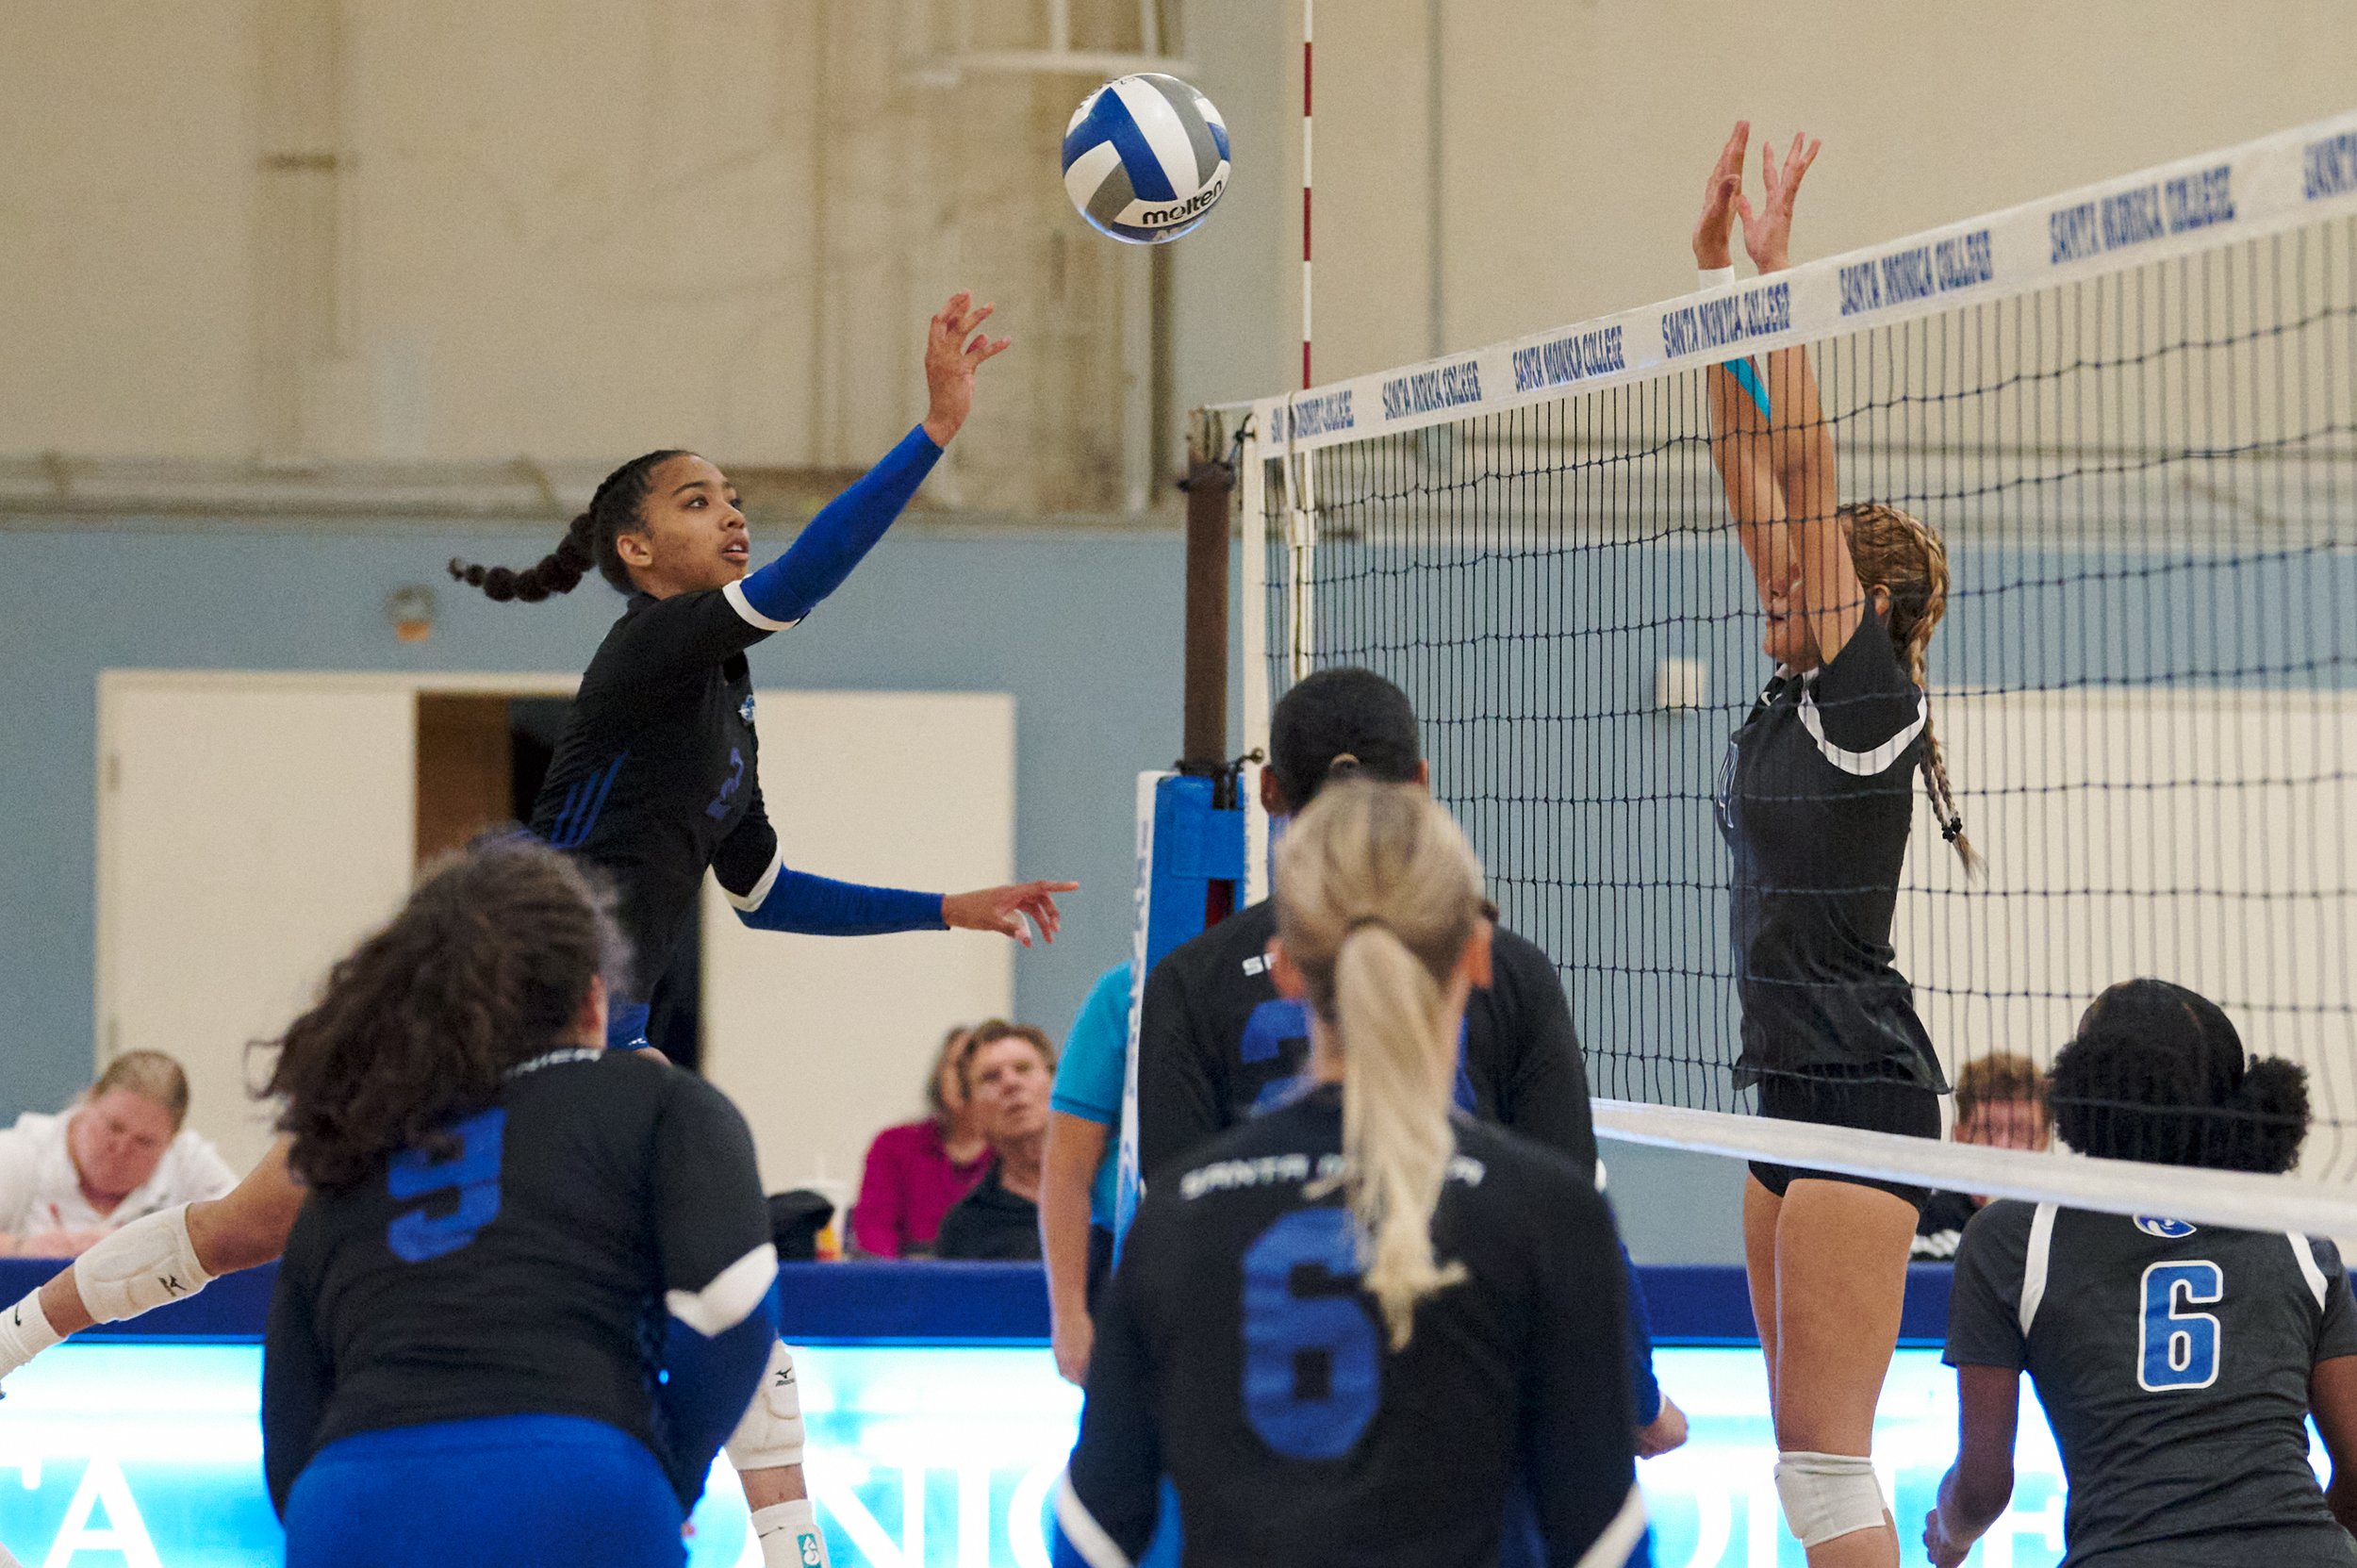  Santa Monica College Corsairs' Amaya Bernardo hits the ball past West Los Angeles College Wildcats' Tania Torres during the women's volleyball game on Wednesday, Oct. 26, 2022, at SMC Gym in Santa Monica, Calif. The Corsairs won 3-0. (Nicholas McCal